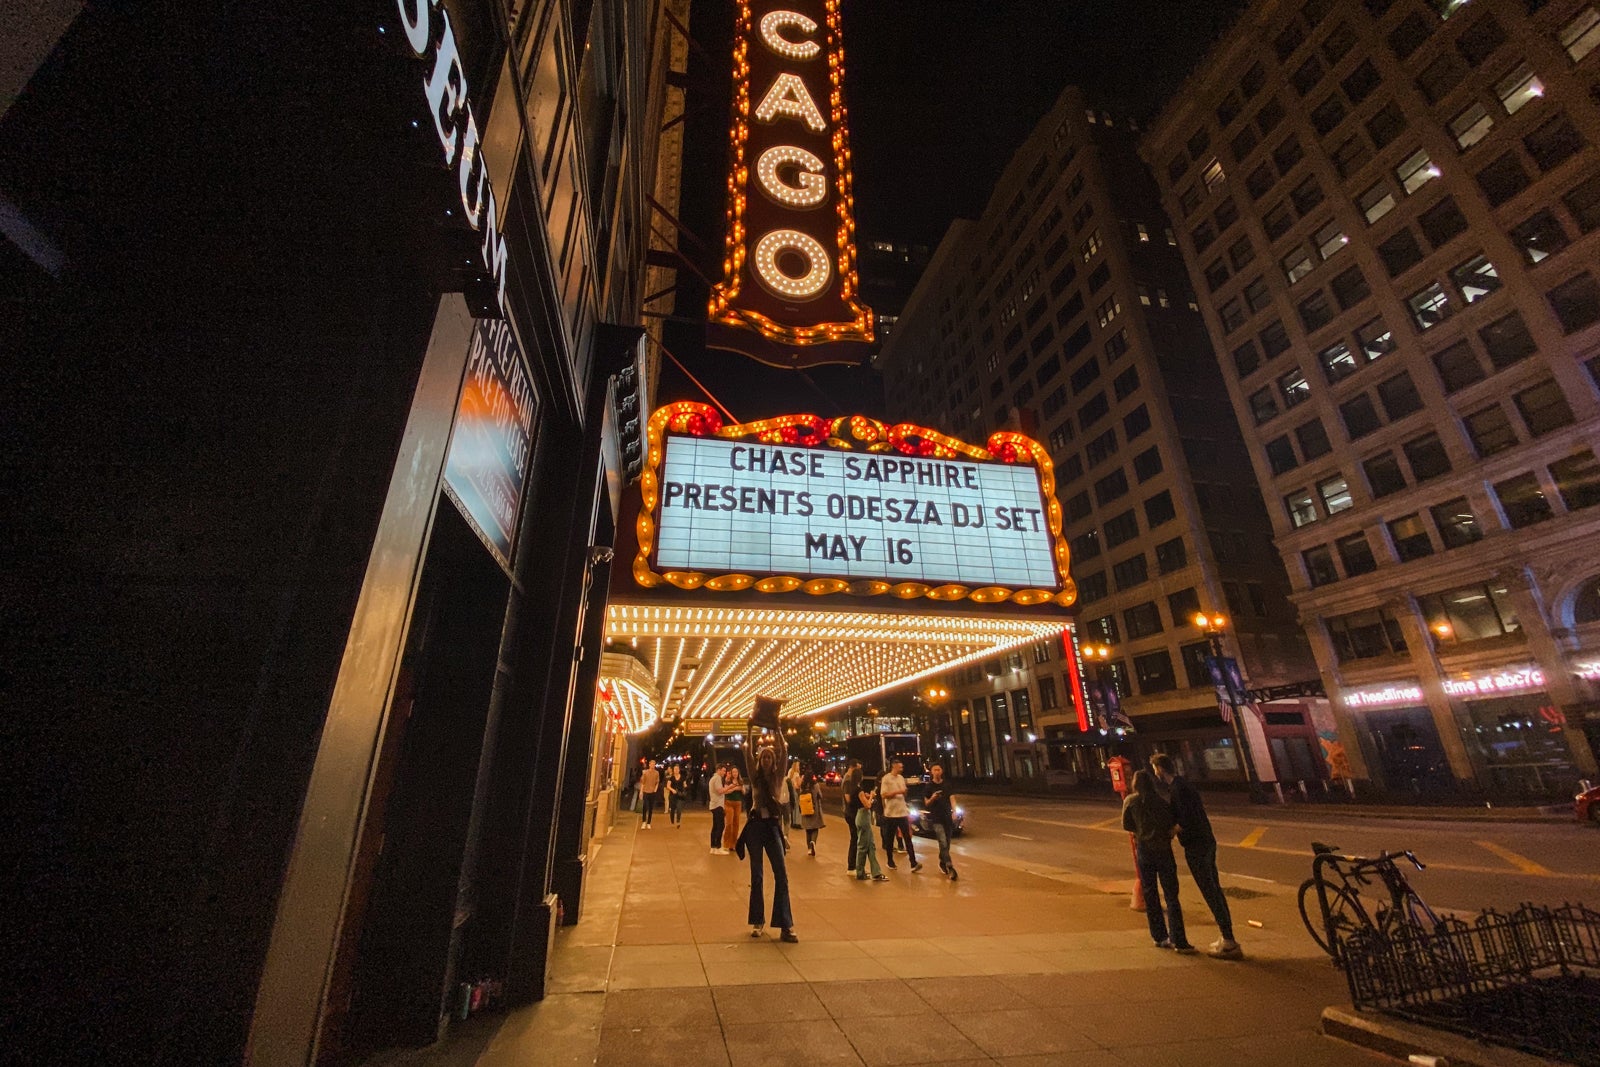 The exterior of the Chicago Theater at night